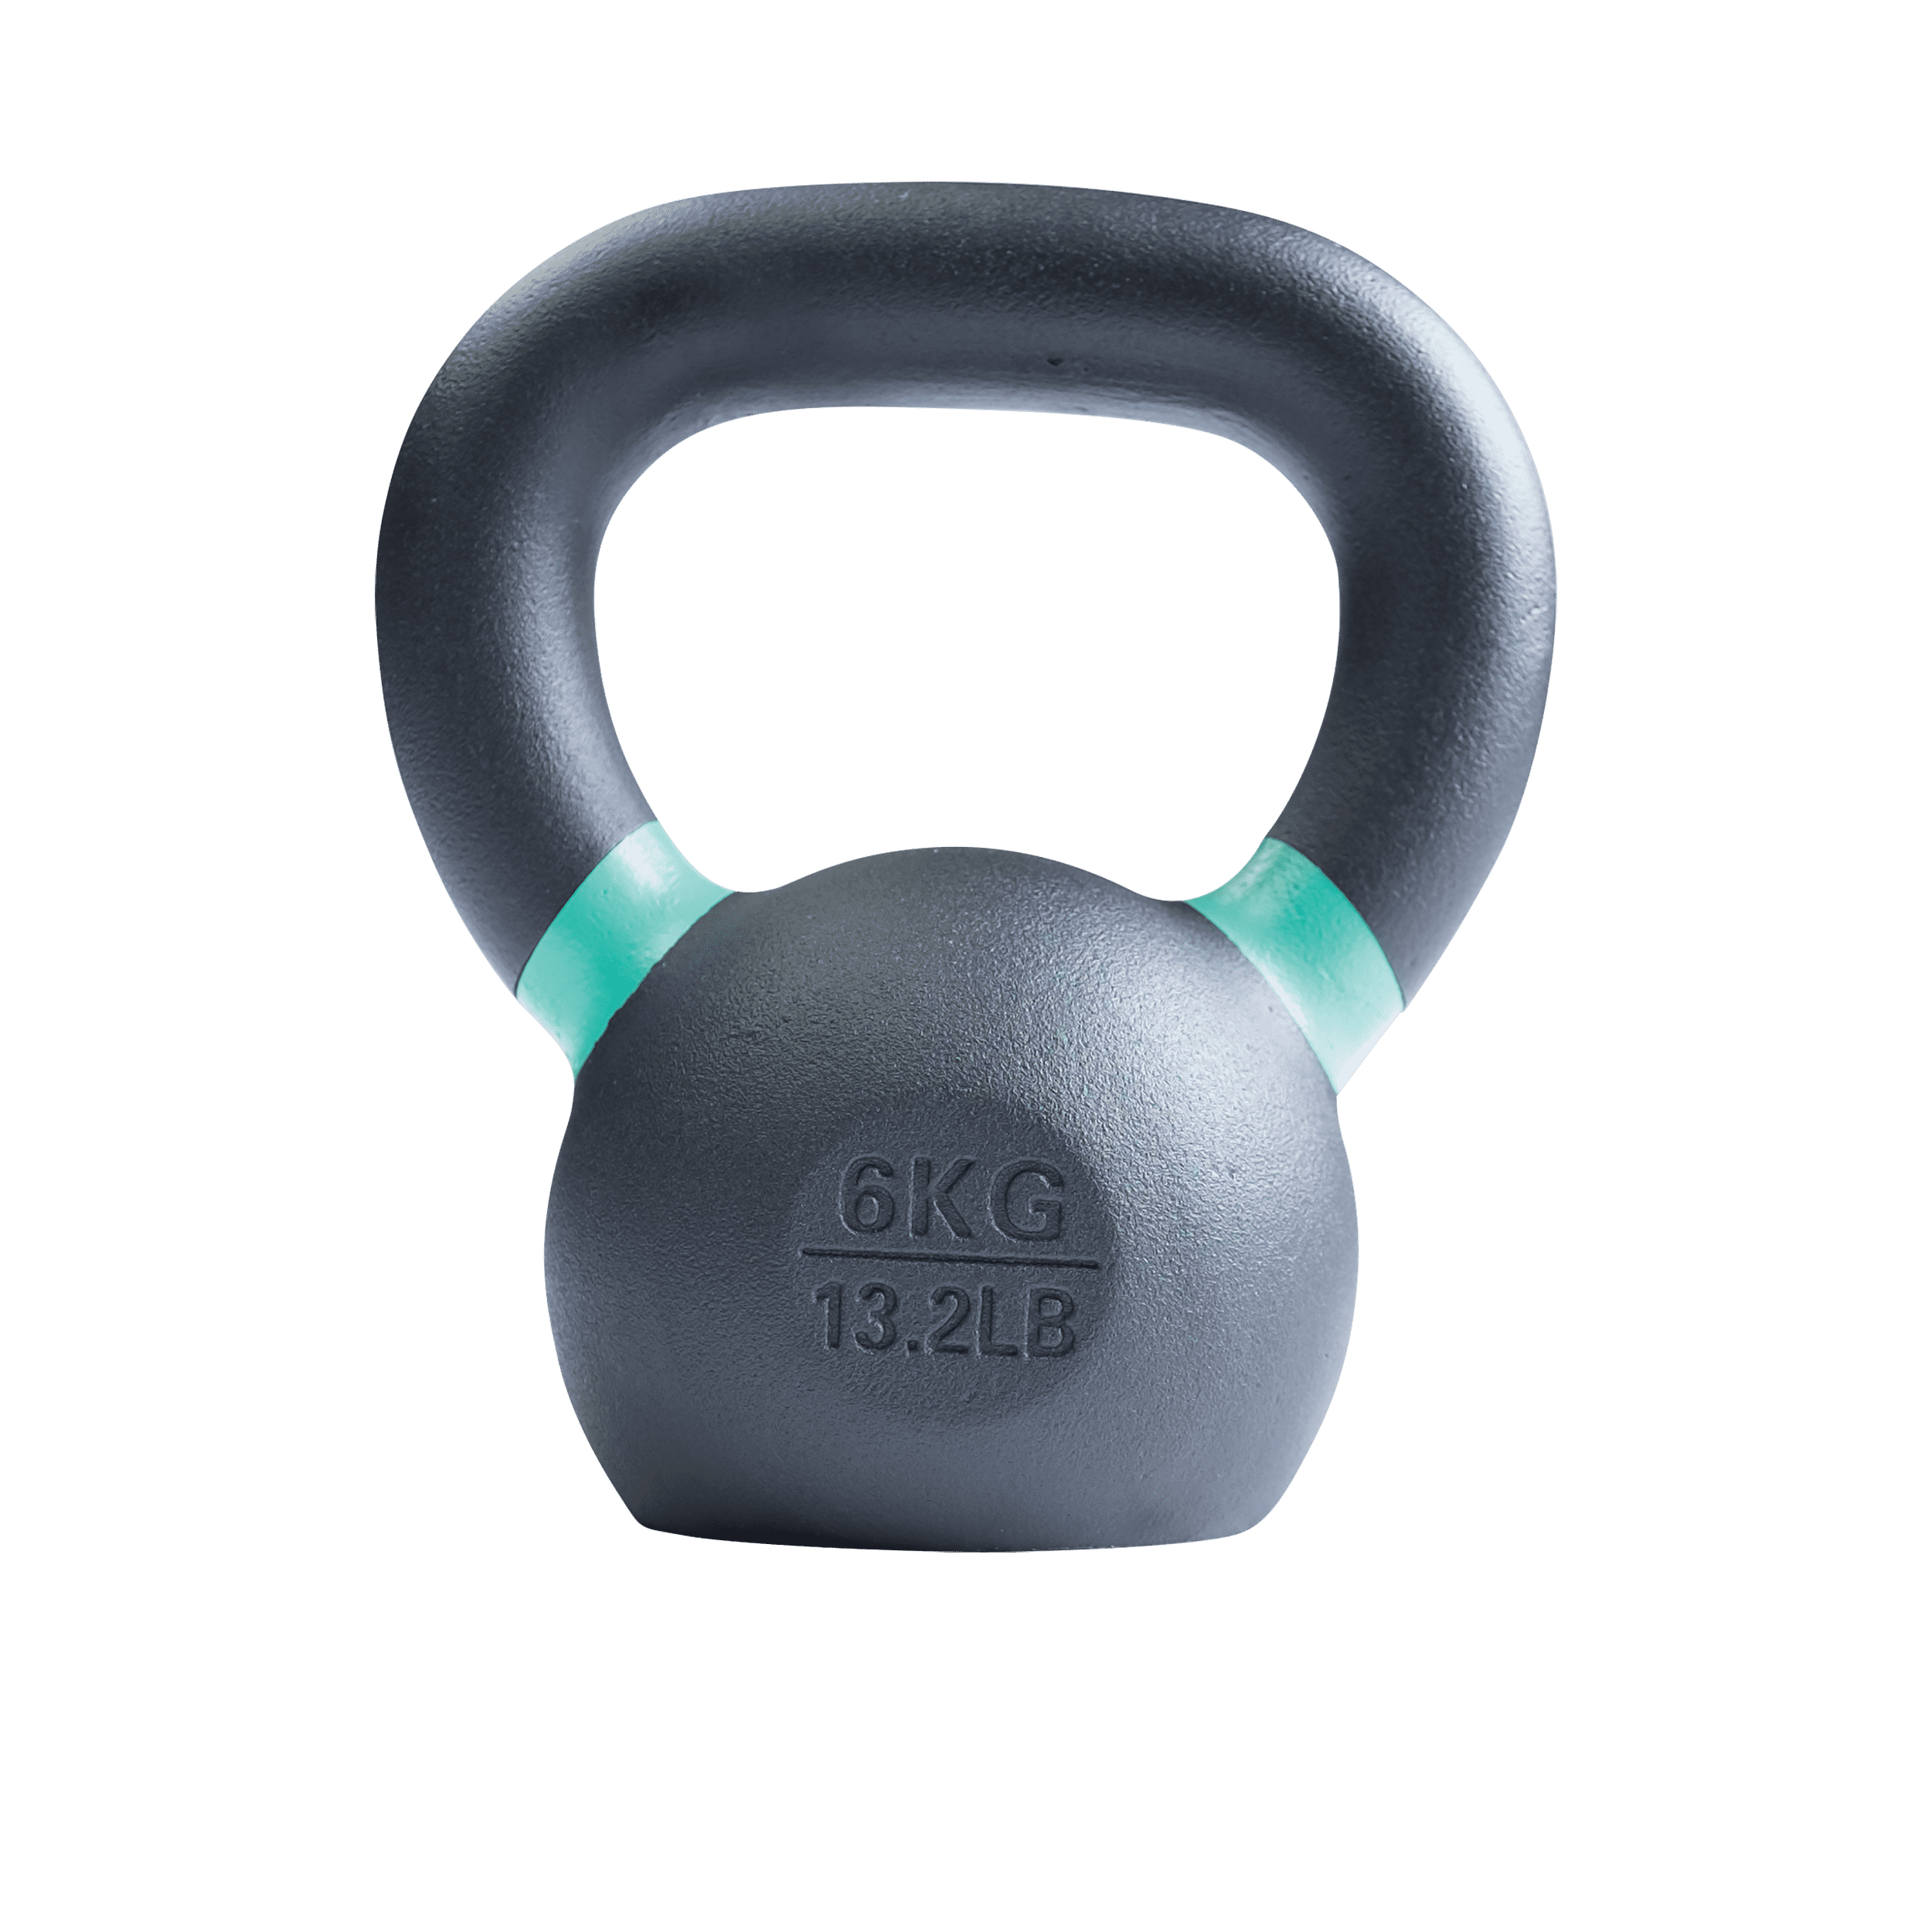 Jmq Fitness Kettlebell Weight Exercise Home Gym Workout - 6kg